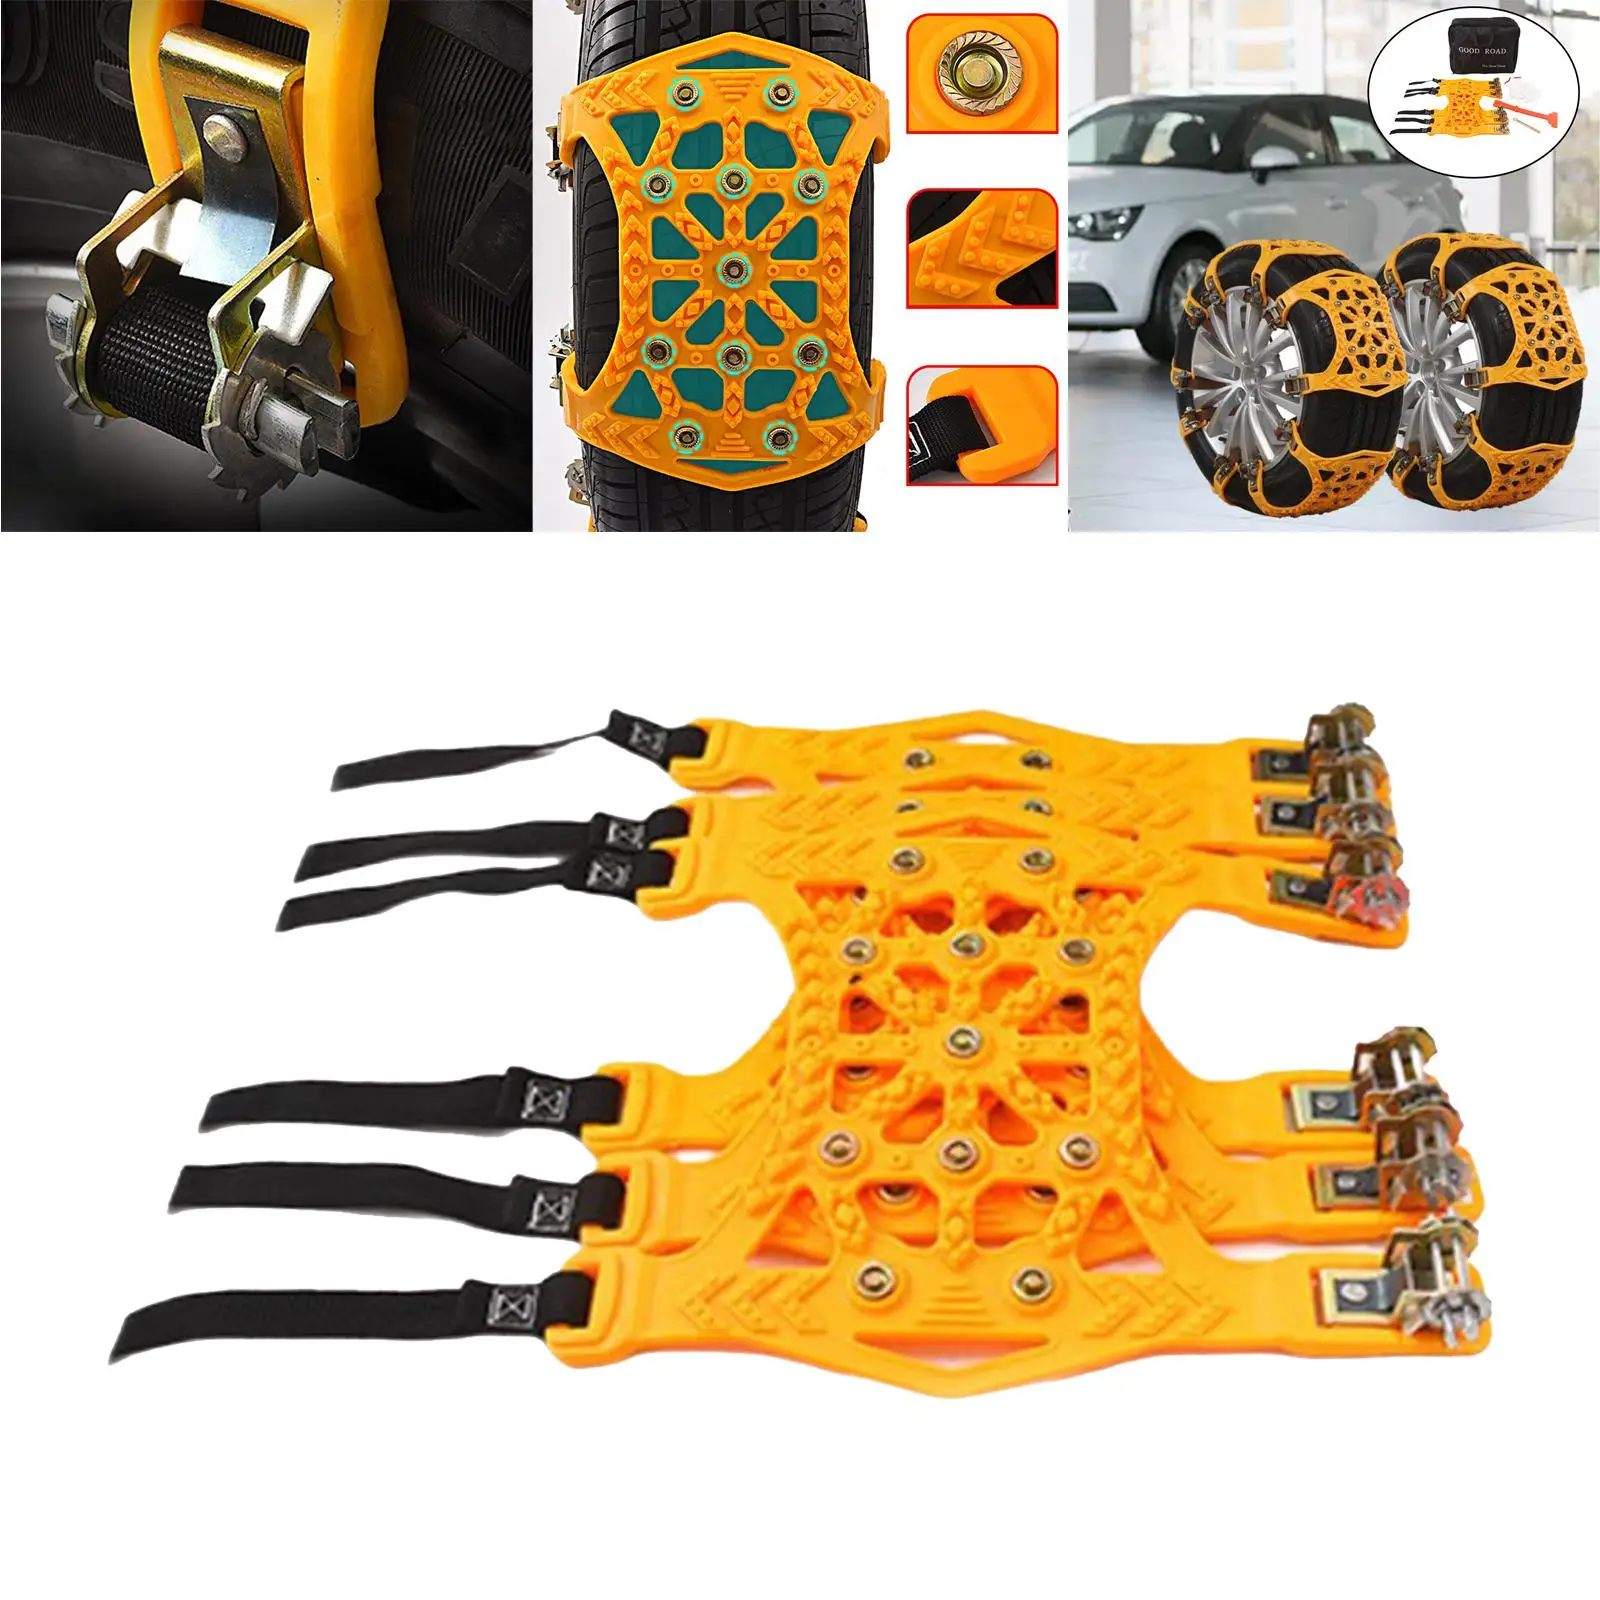 3 Pieces Tire Chains Applicable Tire Width 165-265mm for Emergency Wheel